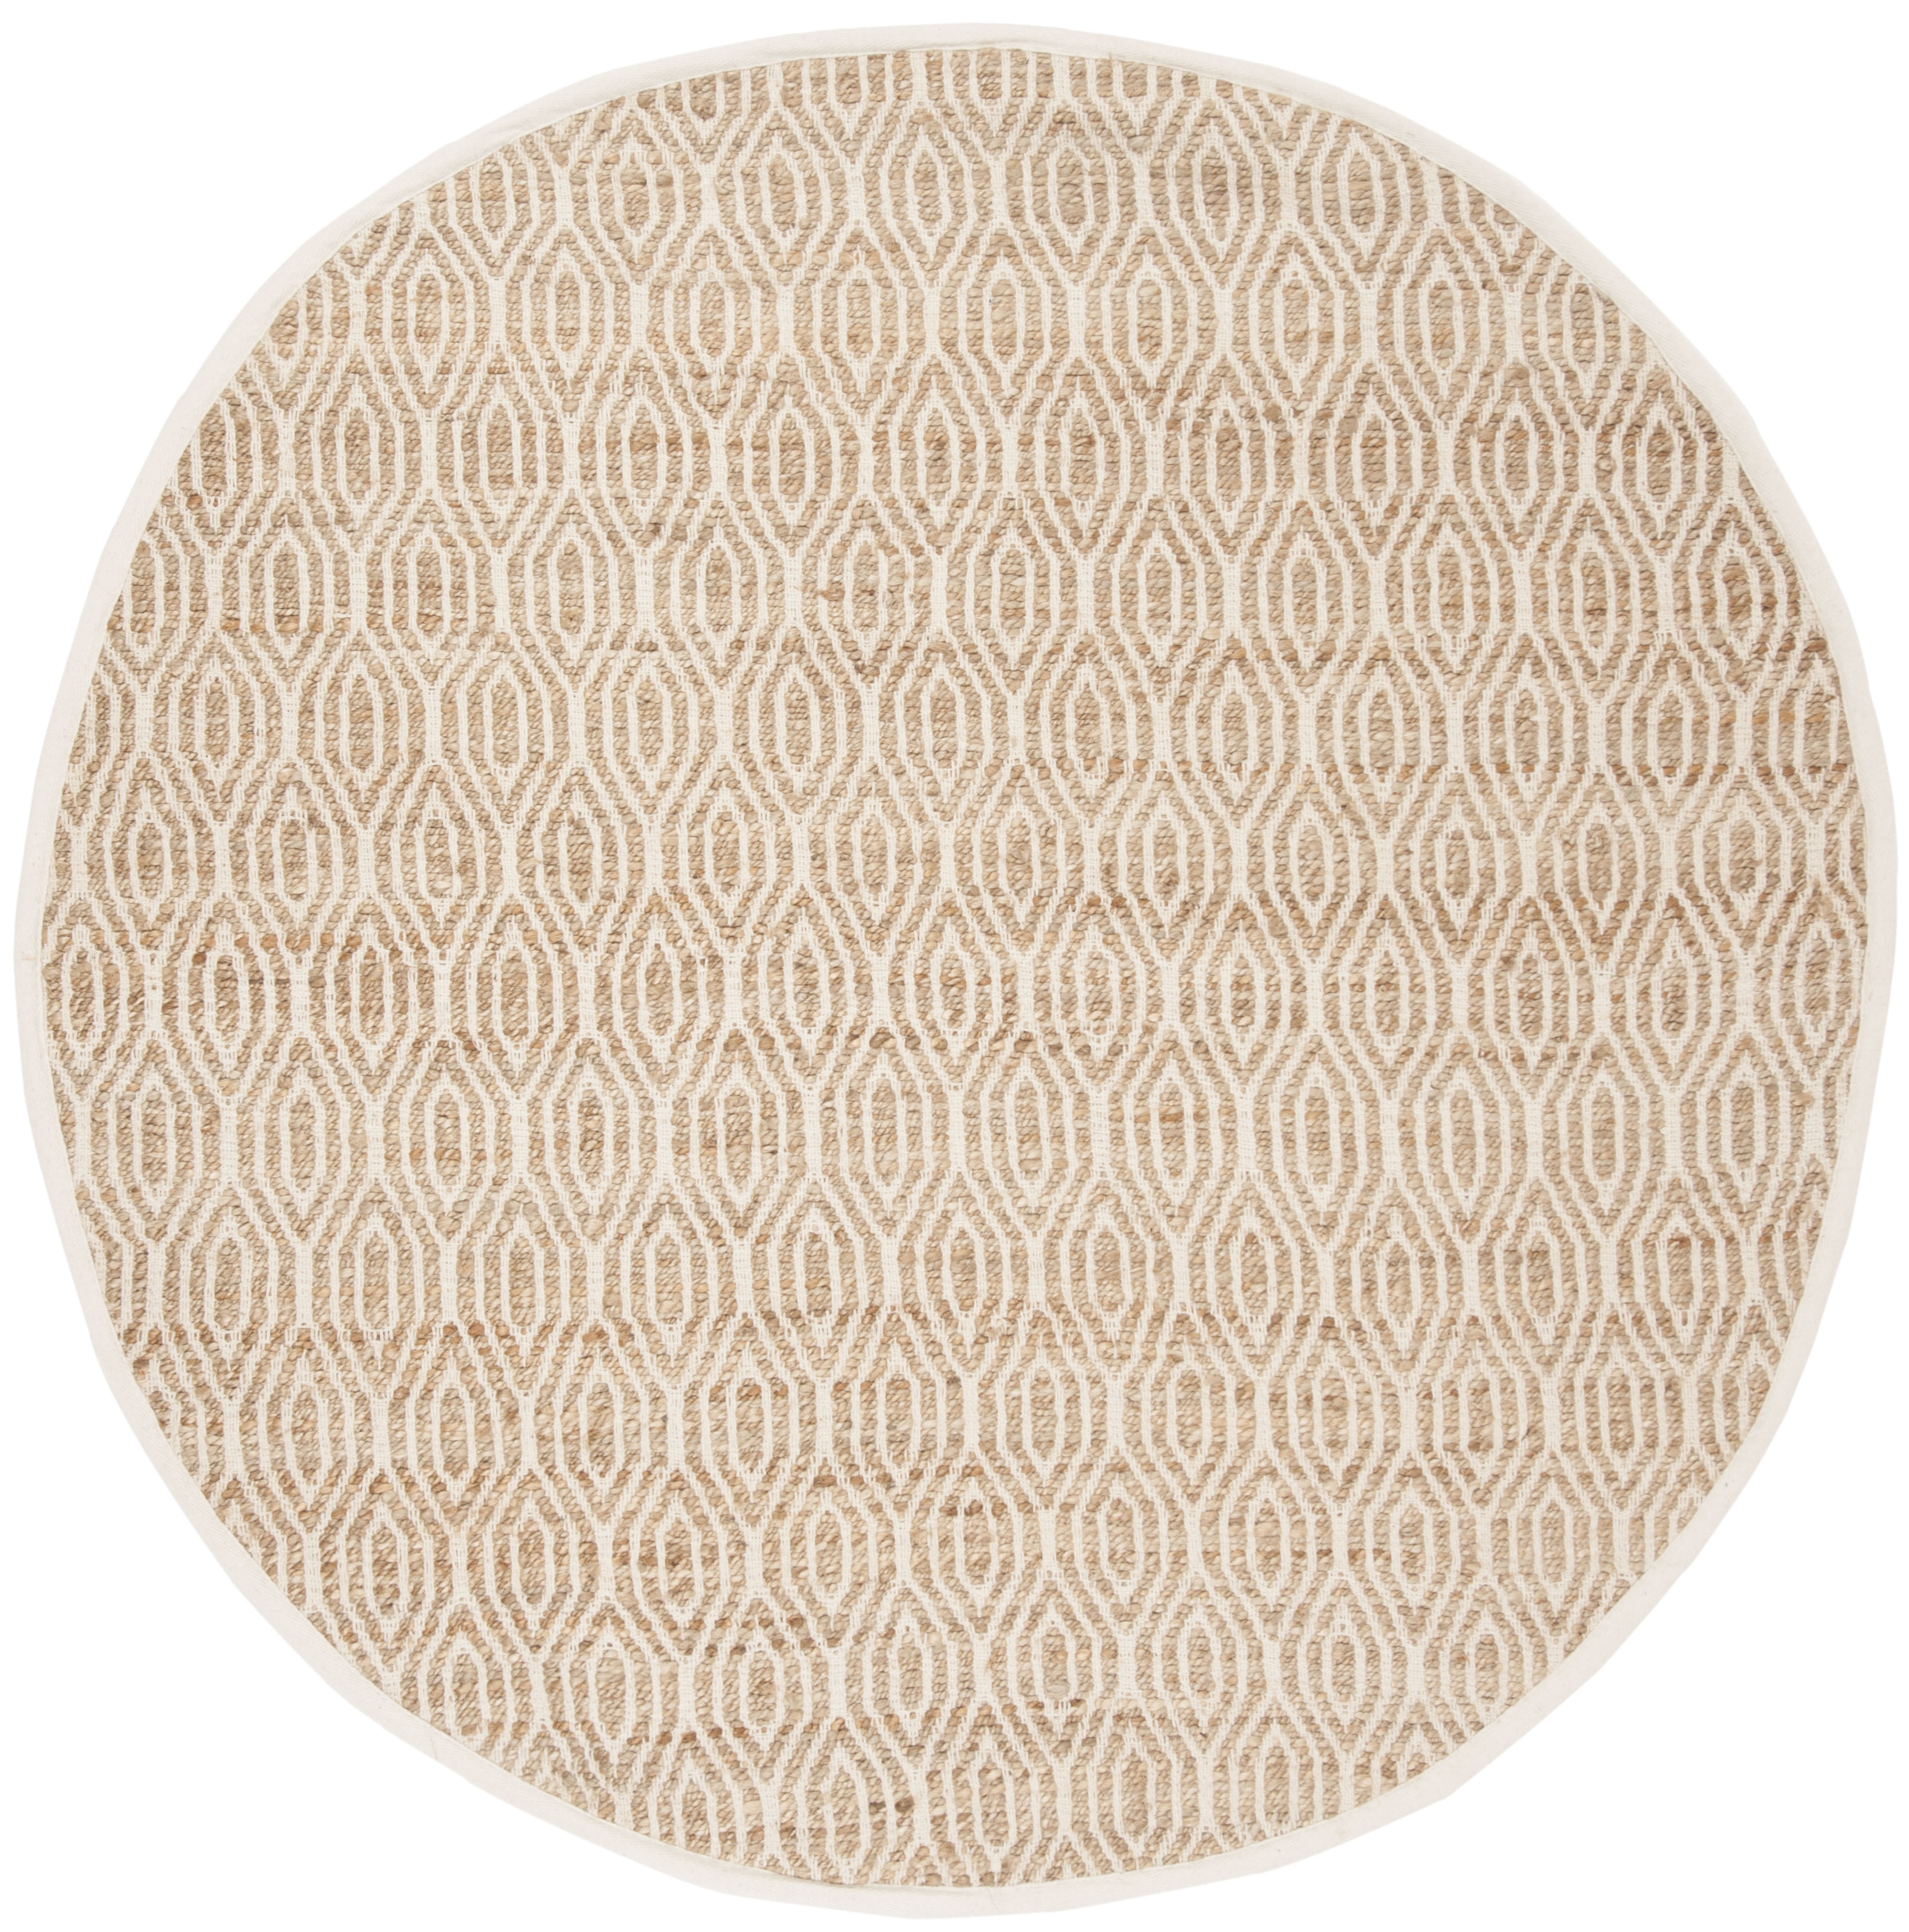 Arlo Home Hand Woven Area Rug, CAP822I, Natural,  6' X 6' Round - Image 0